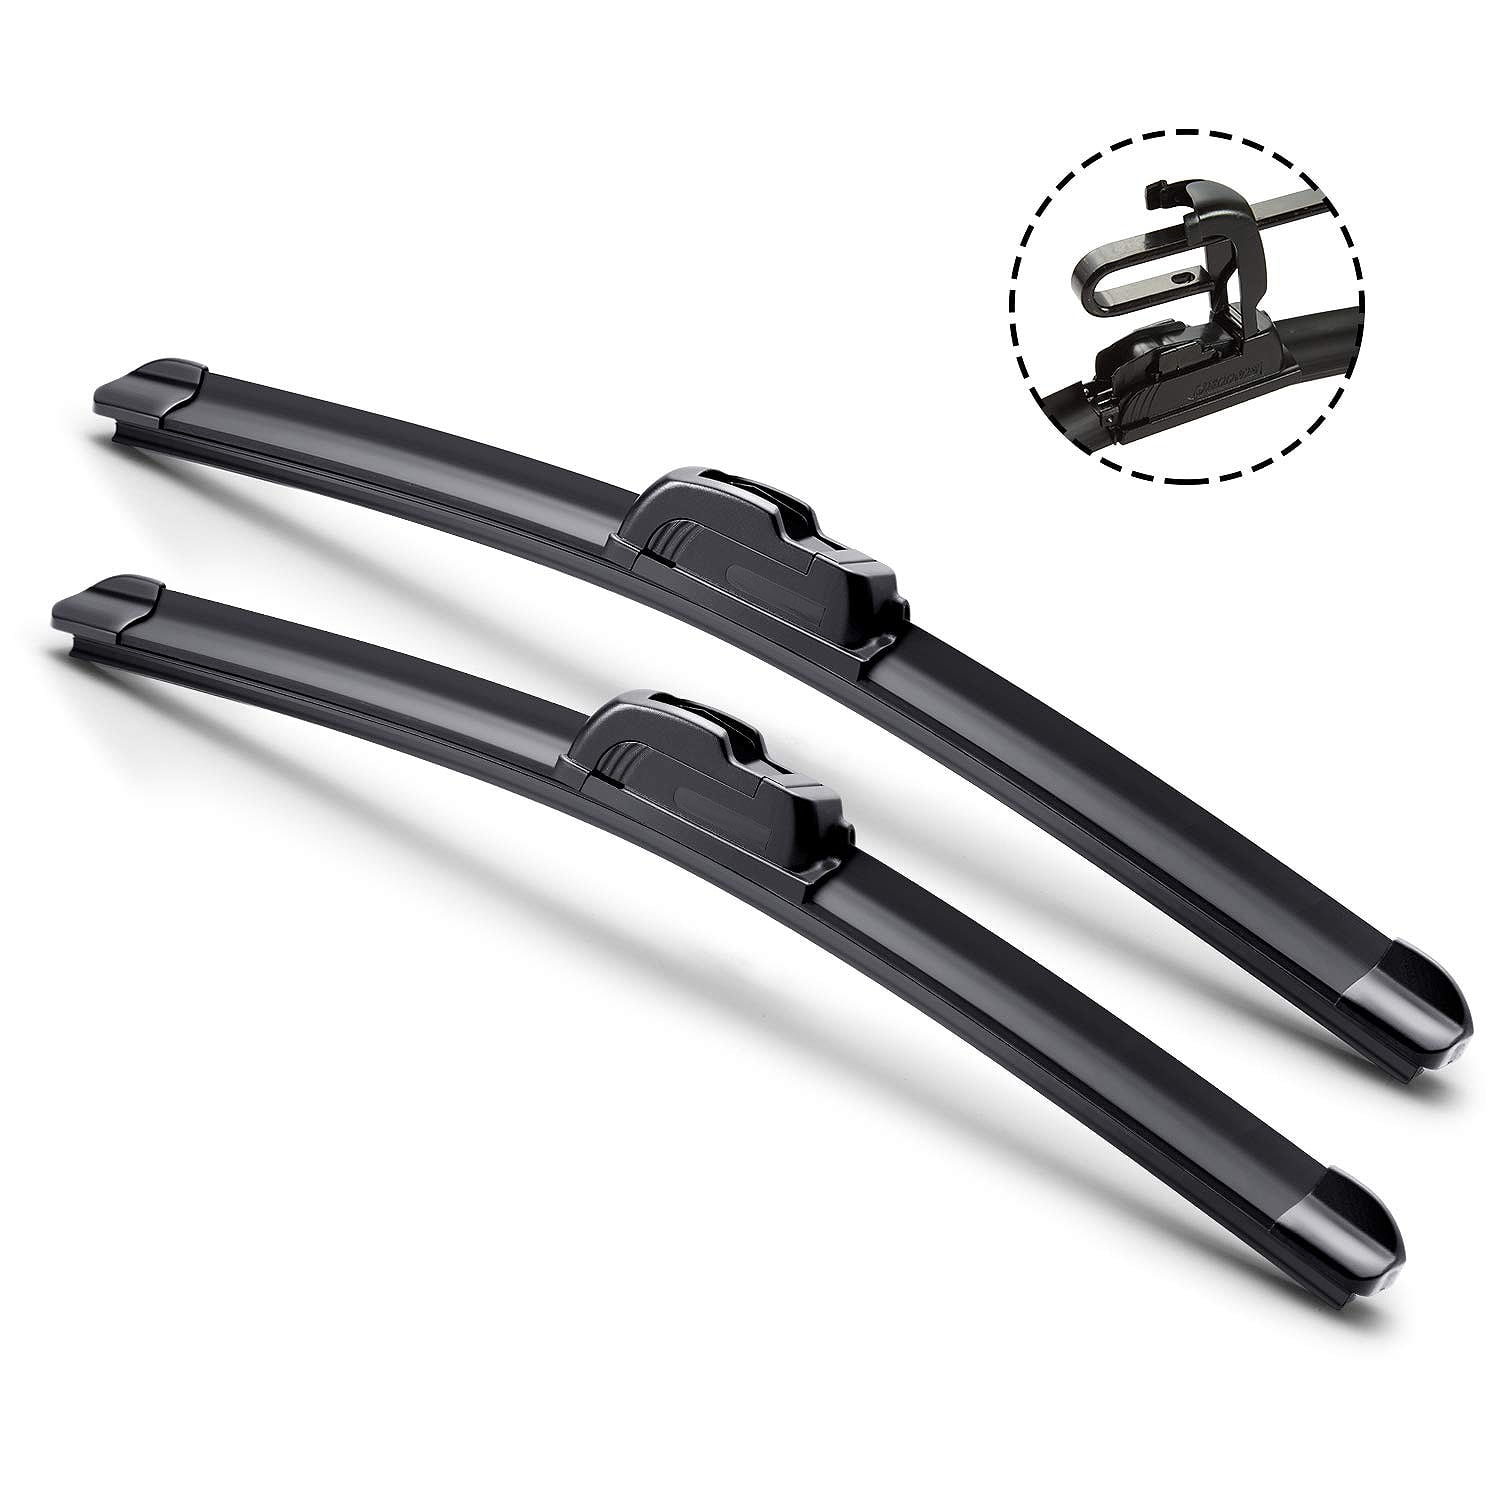 New Vision Genuine Windshield Wipers 20 inches and 20 inches Durable Original Equipment Replacement Wiper Blades J Hook Pack of 2 